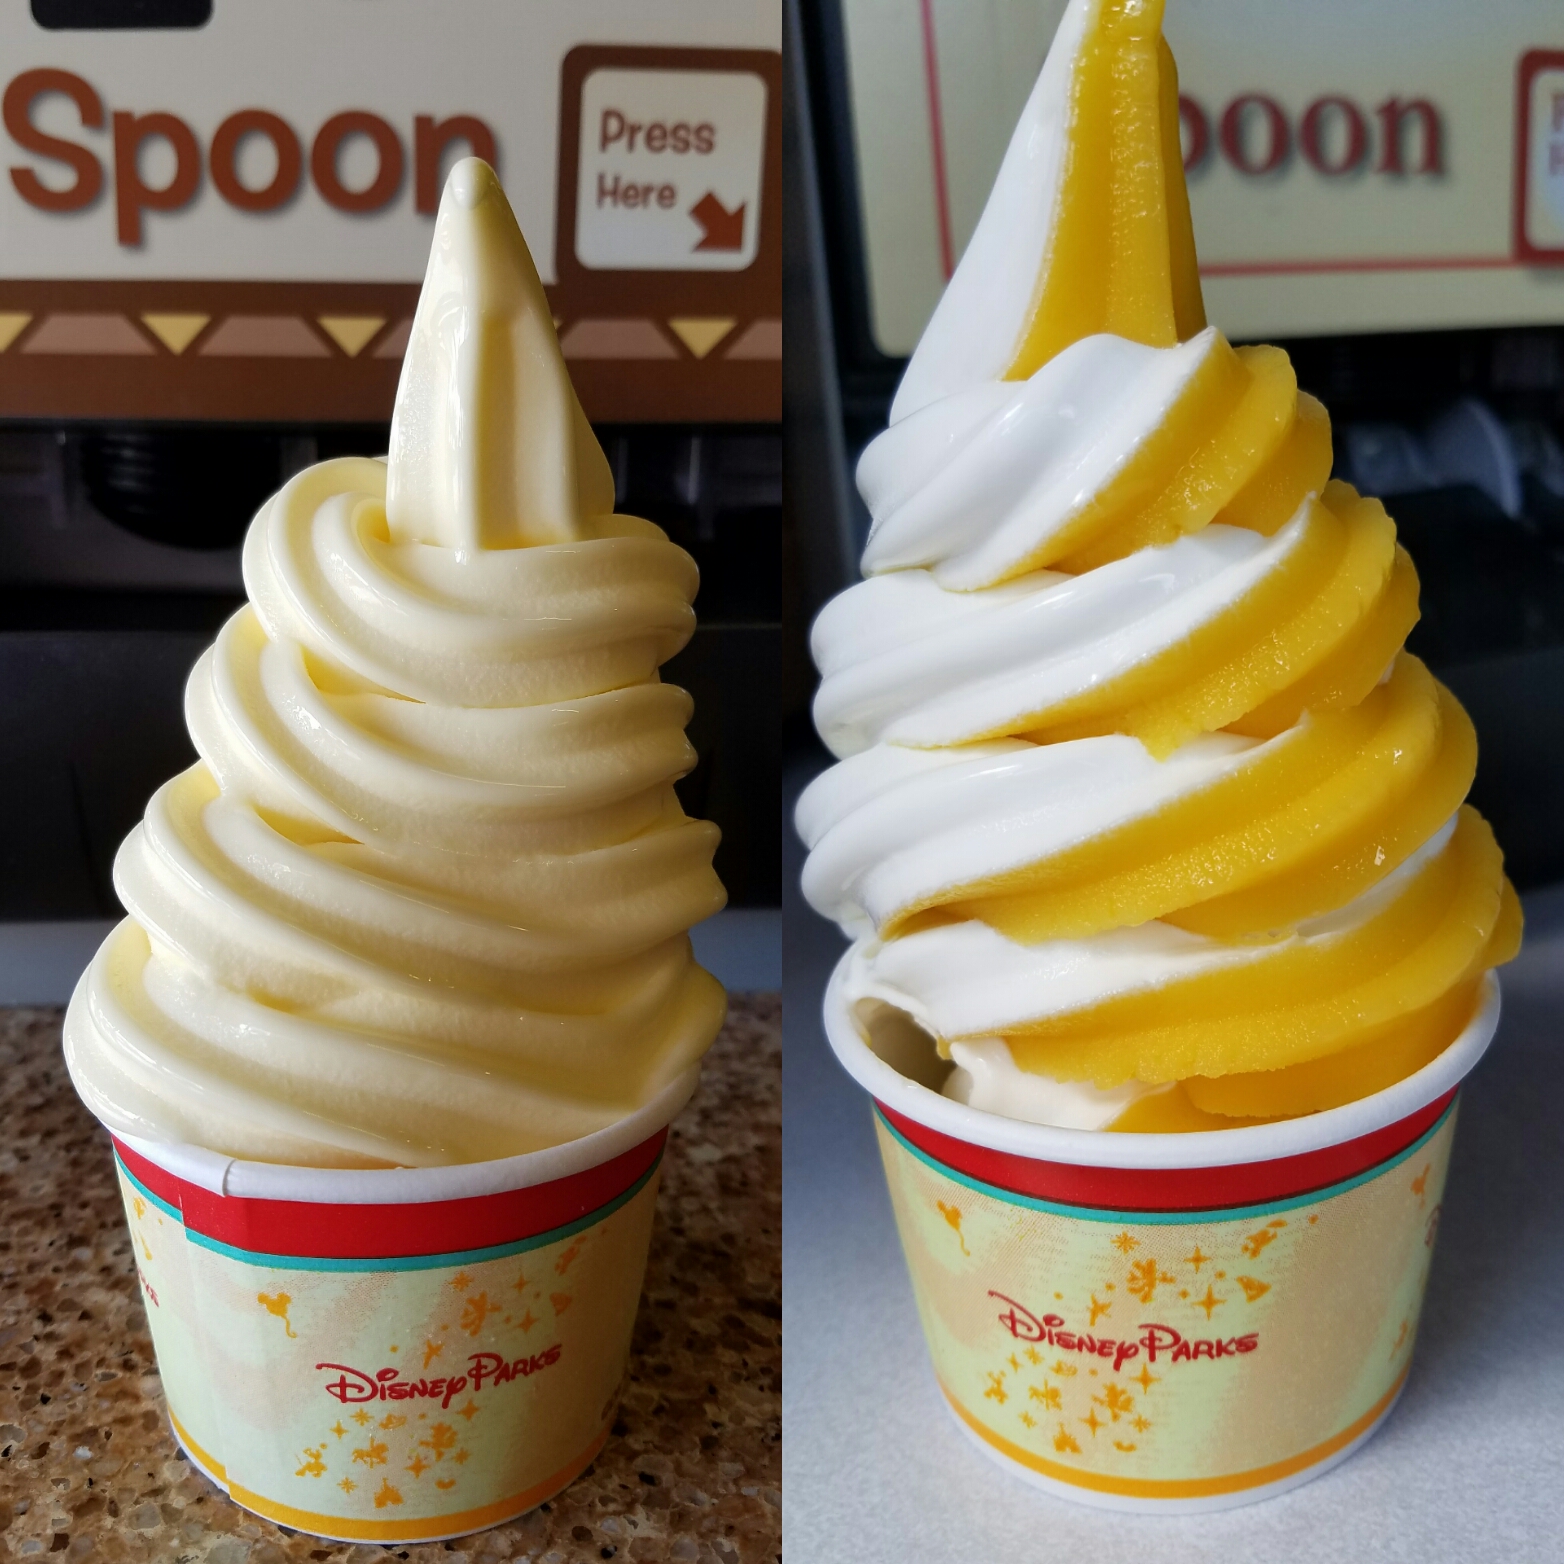 Disney’s Dole Whip Cup vs Citrus Swirl – Which is better?